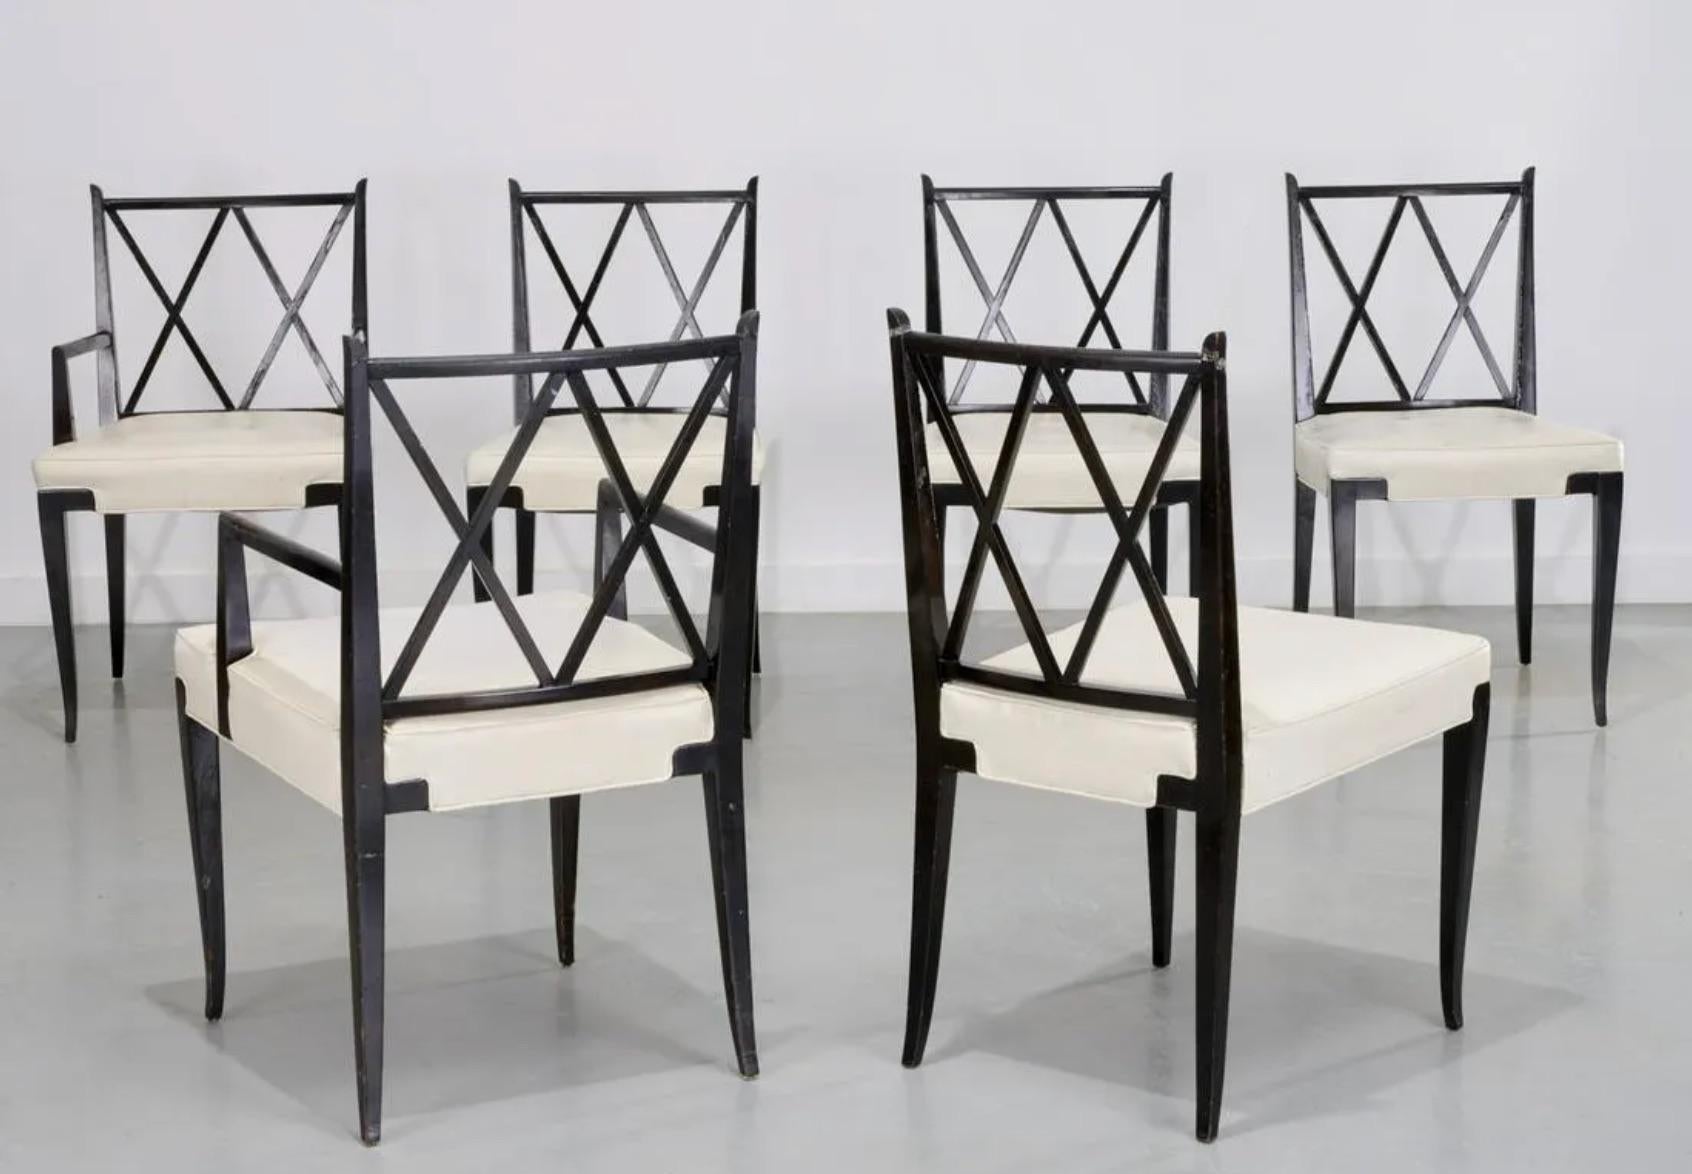 A classic set of six ebonized mahogany dining chairs designed by Tommi Parzinger for Parzinger originals, circa 1950. Two arm chairs and four side chairs included in this set Upholstered in White Performance Linen. Beautiful and graceful design with